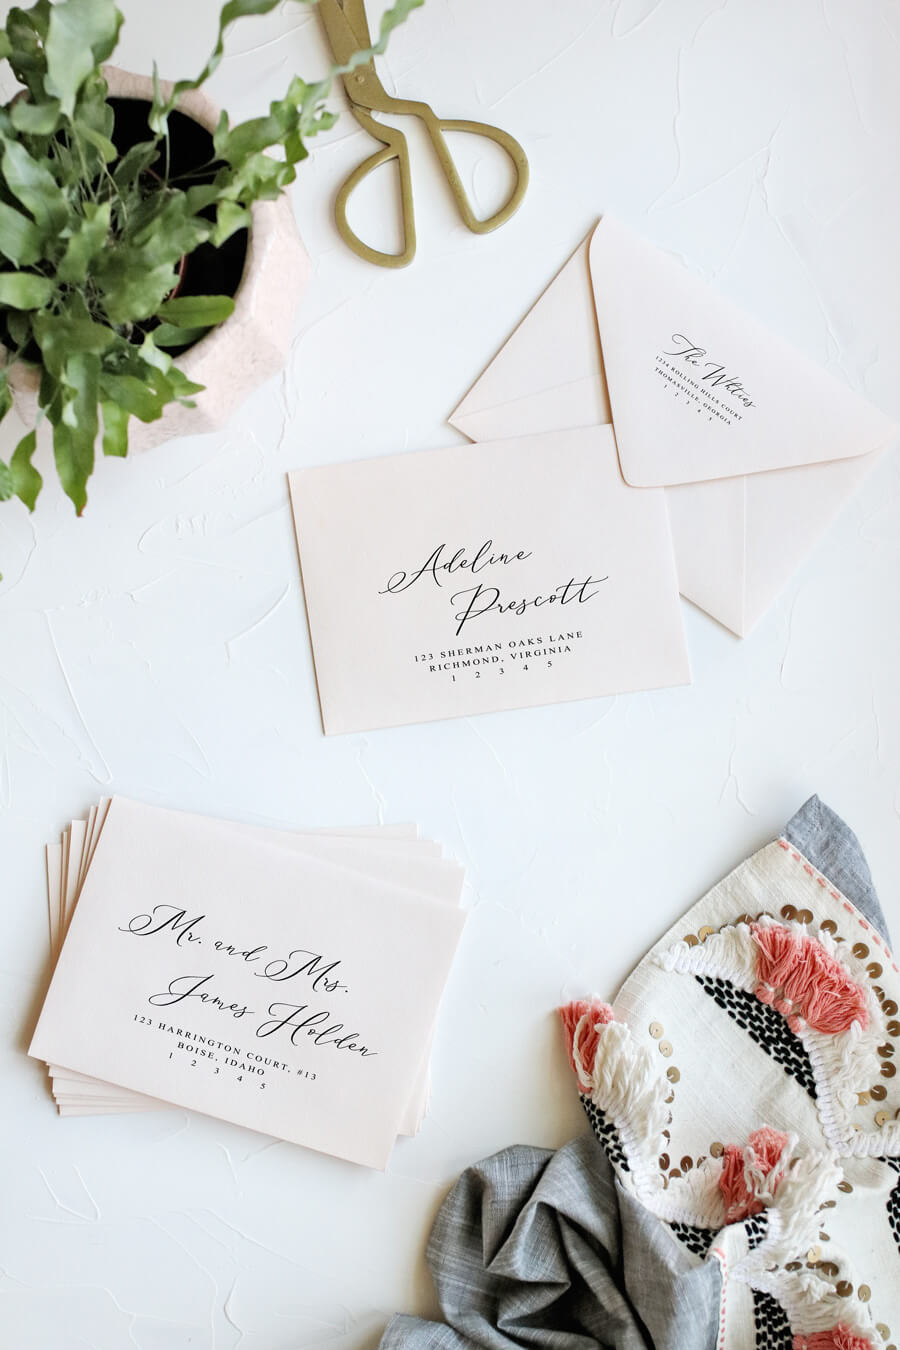 How To Print Envelopes The Easy Way | Pipkin Paper Company Inside Paper Source Templates Place Cards